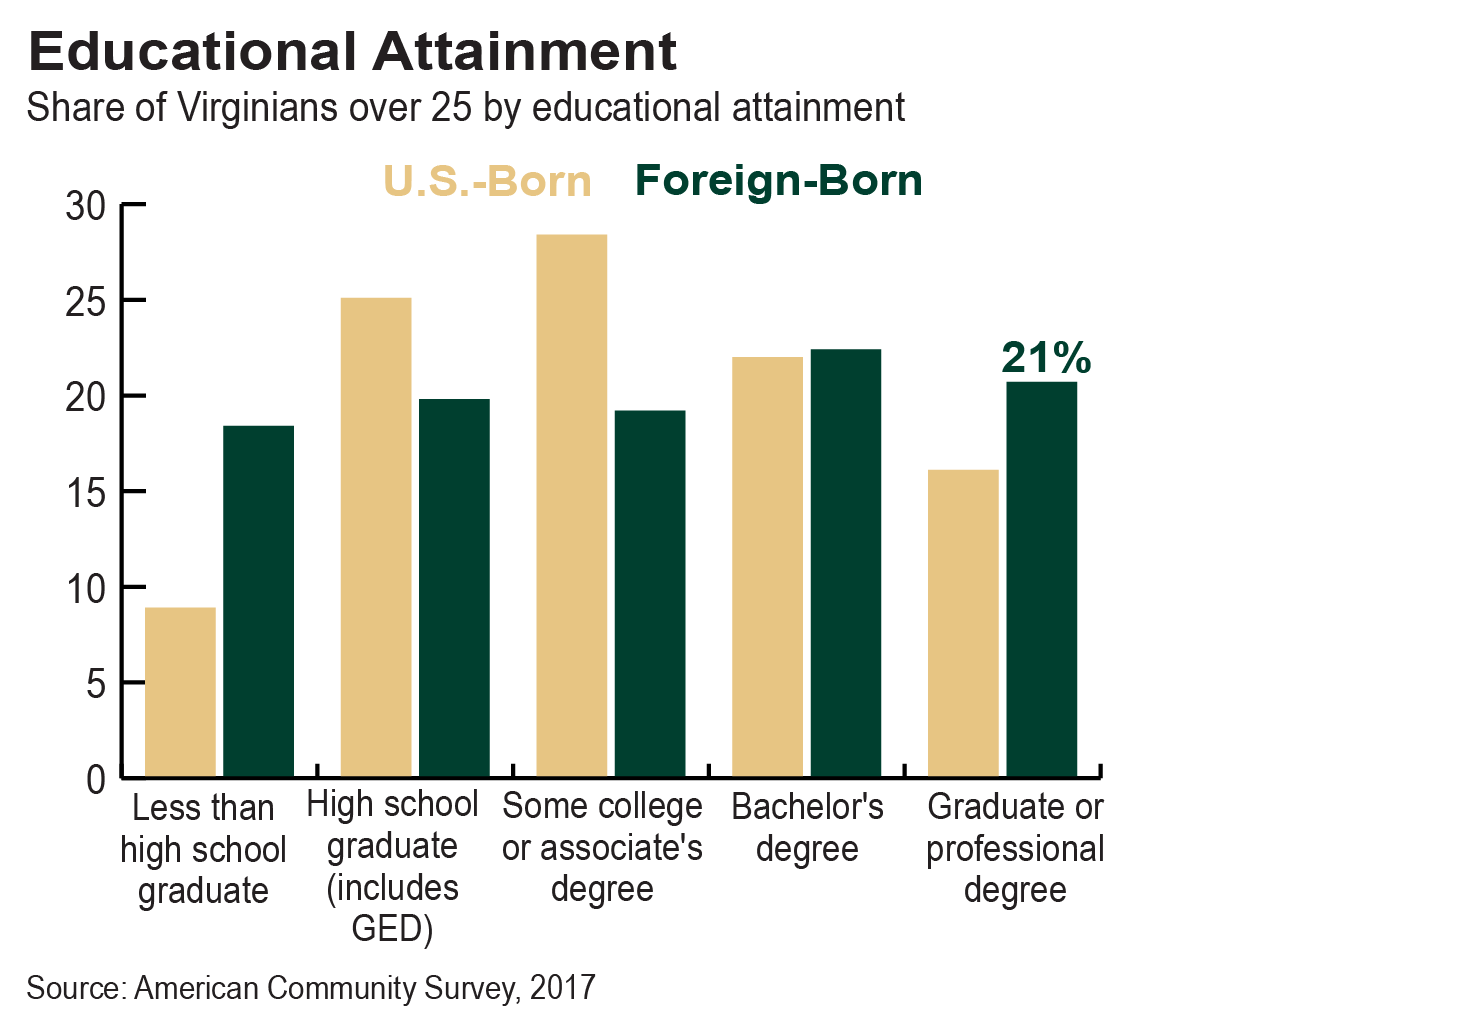 Bar graph showing the share of U.S. born and foreign-born Virginians over age 25 by educational attainment.  Virginia immigrants are more likely to hold a bachelor's or advanced degree compared to U.S.-born residents, and foreign-born Virginians are also more likely than U.S.-born Virginians to have less than a high school education according to American Community Survey 2017 data